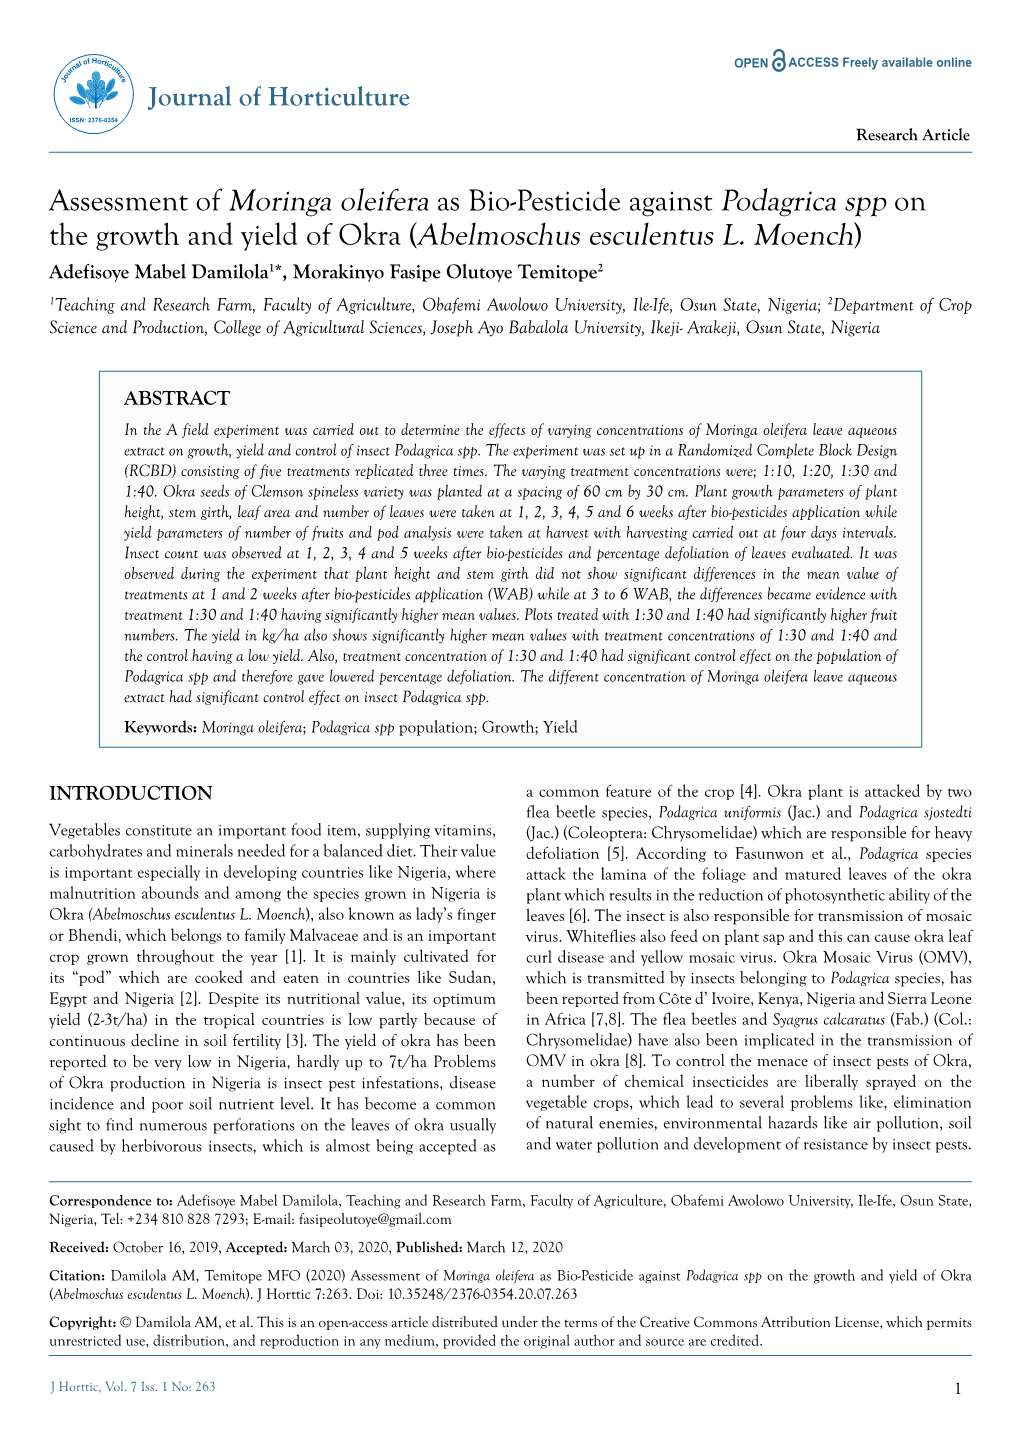 Assessment of Moringa Oleifera As Bio-Pesticide Against Podagrica Spp on the Growth and Yield of Okra (Abelmoschus Esculentus L